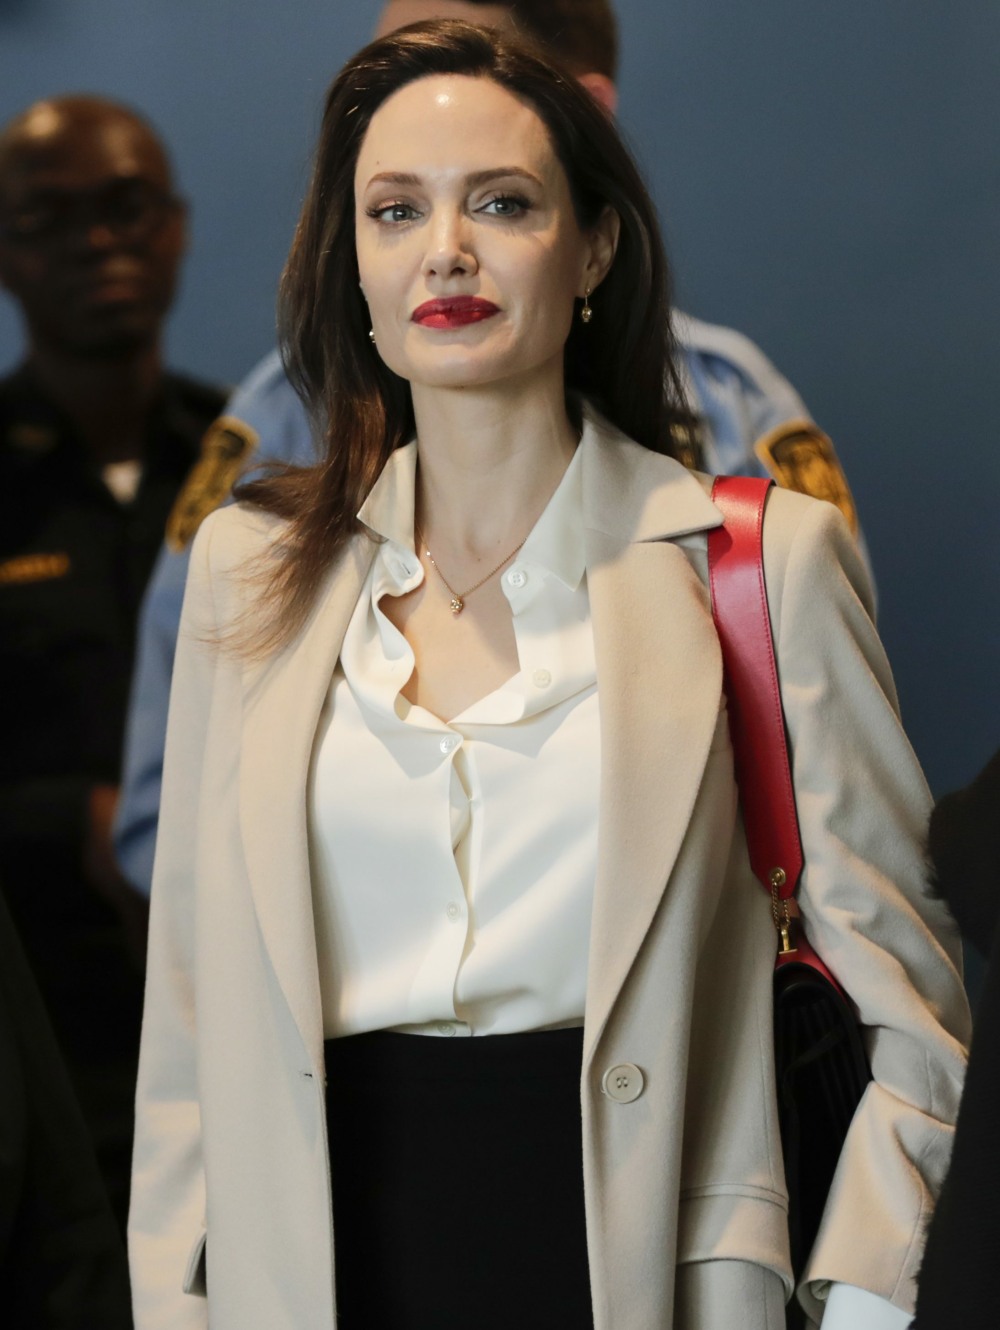 Angelina Jolie at UN for a Speech on Sexual Violence in Conflict